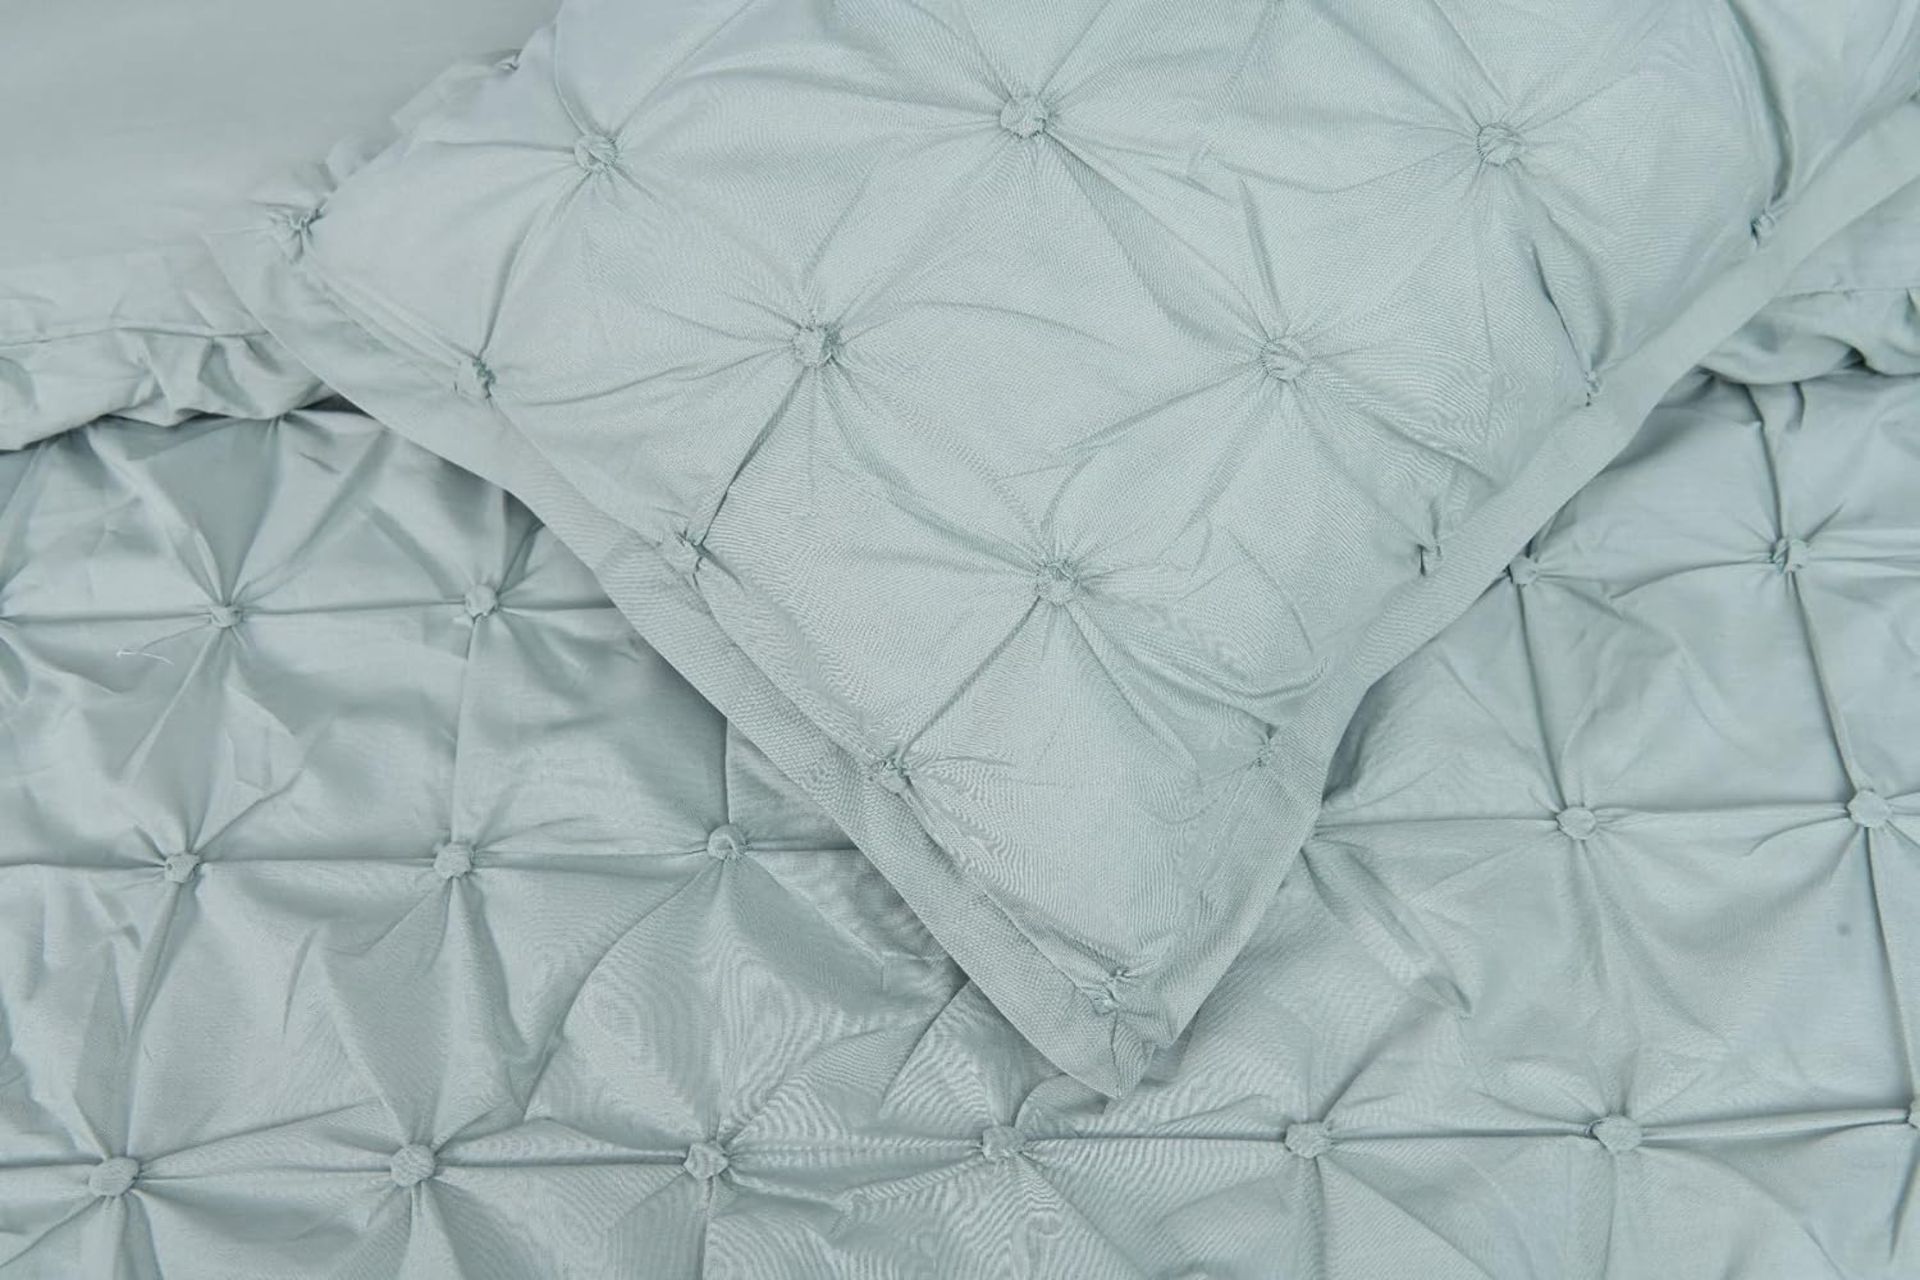 11x NEW & PACKAGED SLEEPDOWN Rouched Easy Care SINGLE Duvet Set - SAGE GREEN. RRP £22.99 EACH. (R7- - Image 4 of 4